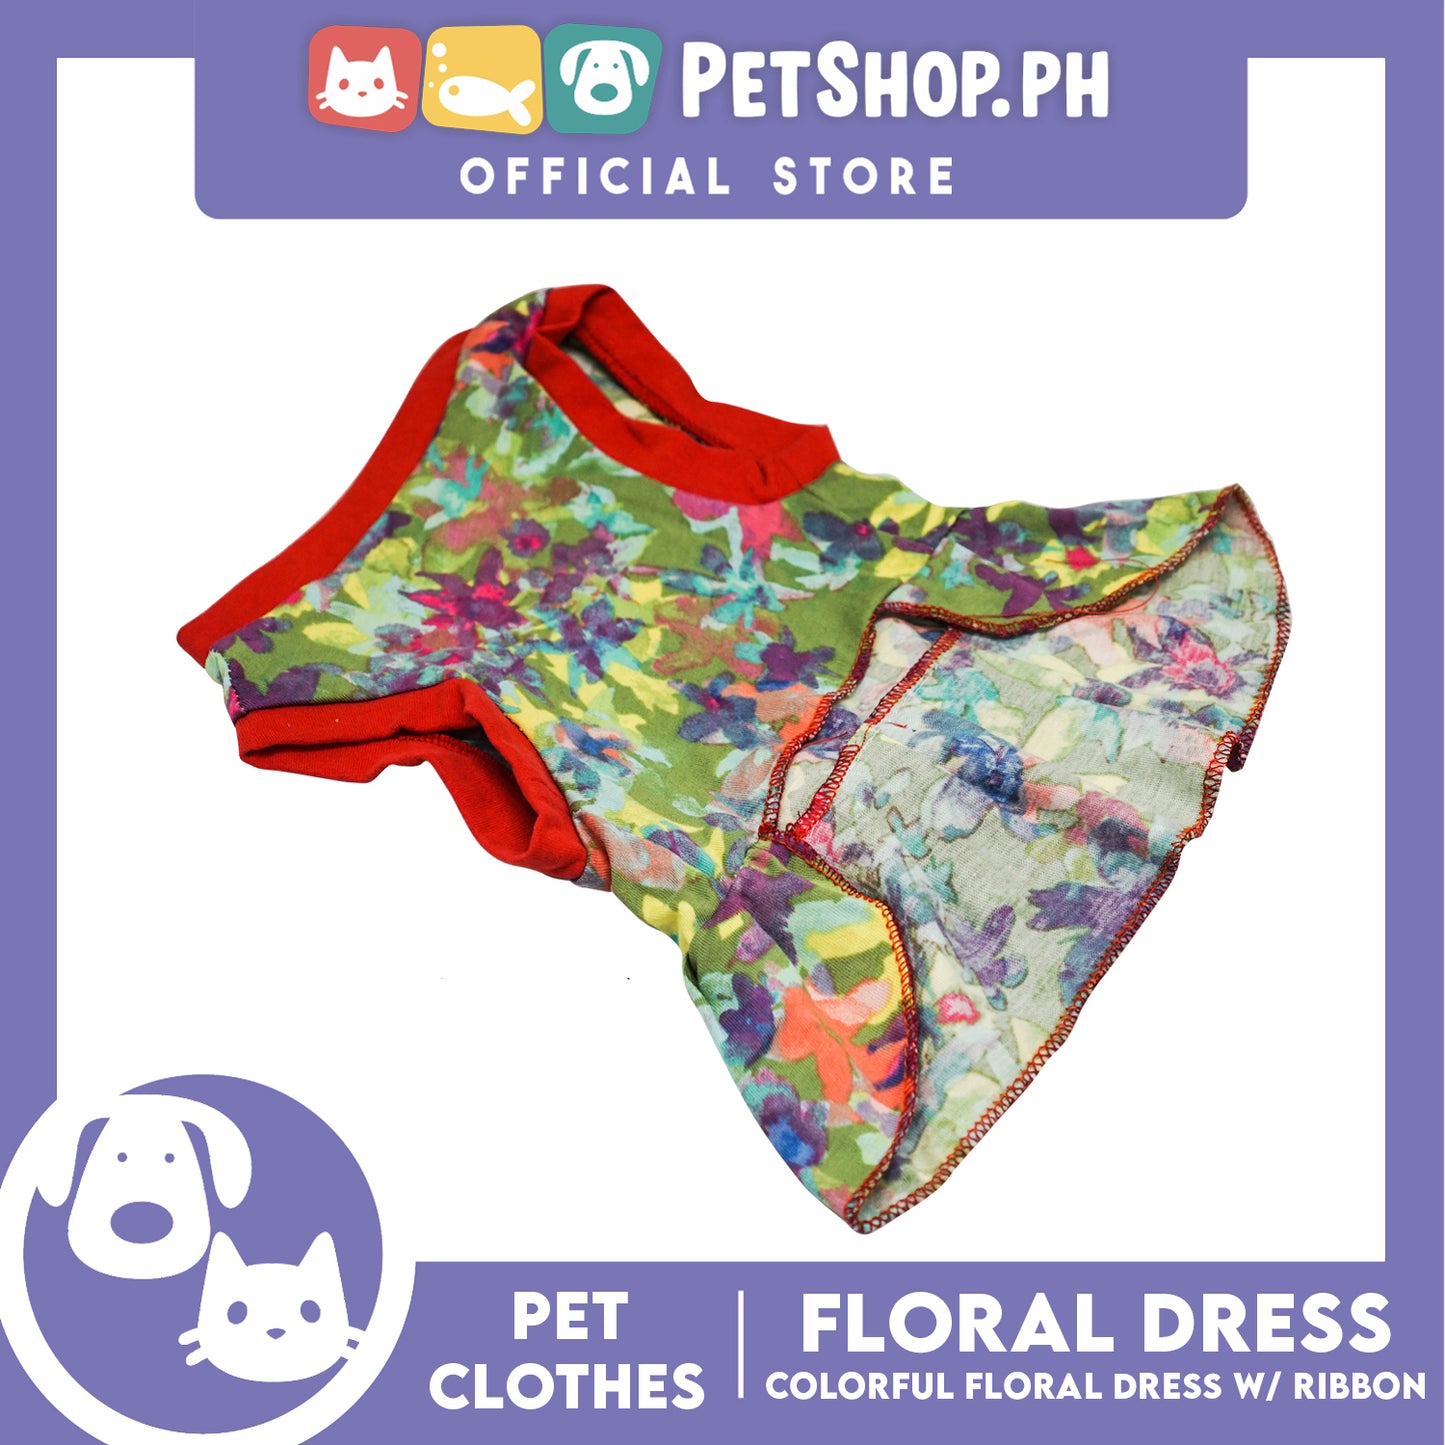 Colorful Floral Pet Dress with Red Ribbon (Large) Pet Shirt for Puppy, Small Dogs and Cats